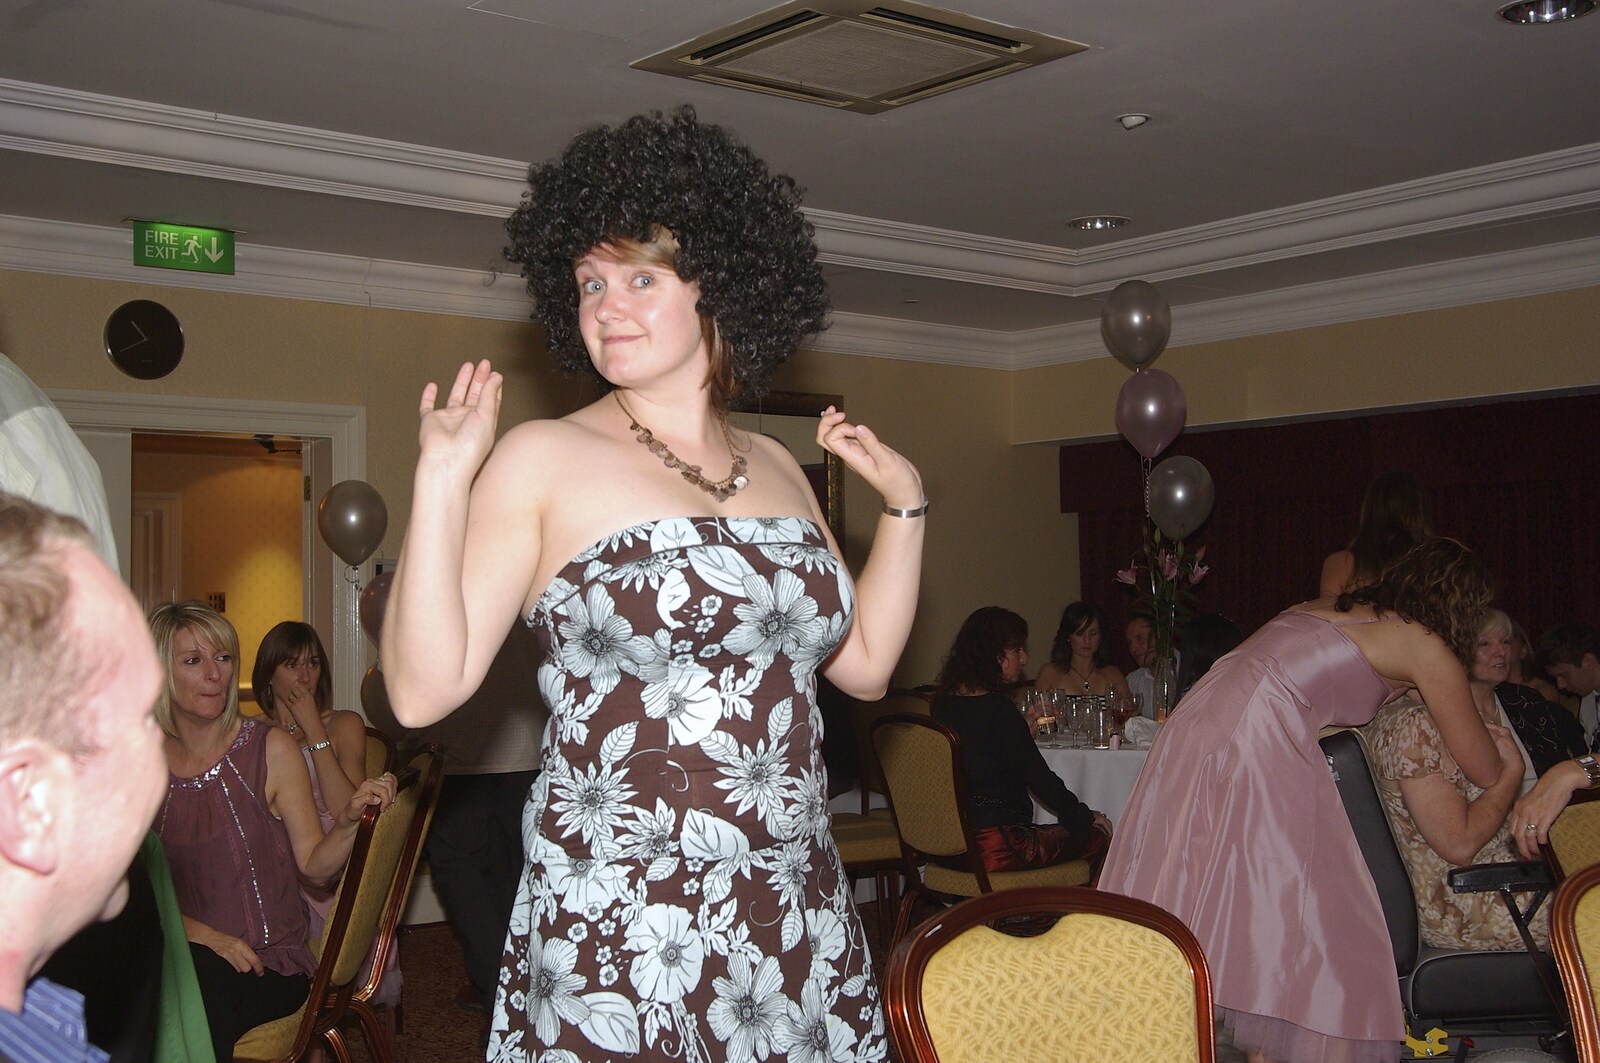 Matt's Wedding Reception, and a BSCC Presentation, Brome, Solihull and Stratford upon Avon - 6th October 2007: Isobel gives the wig a go too